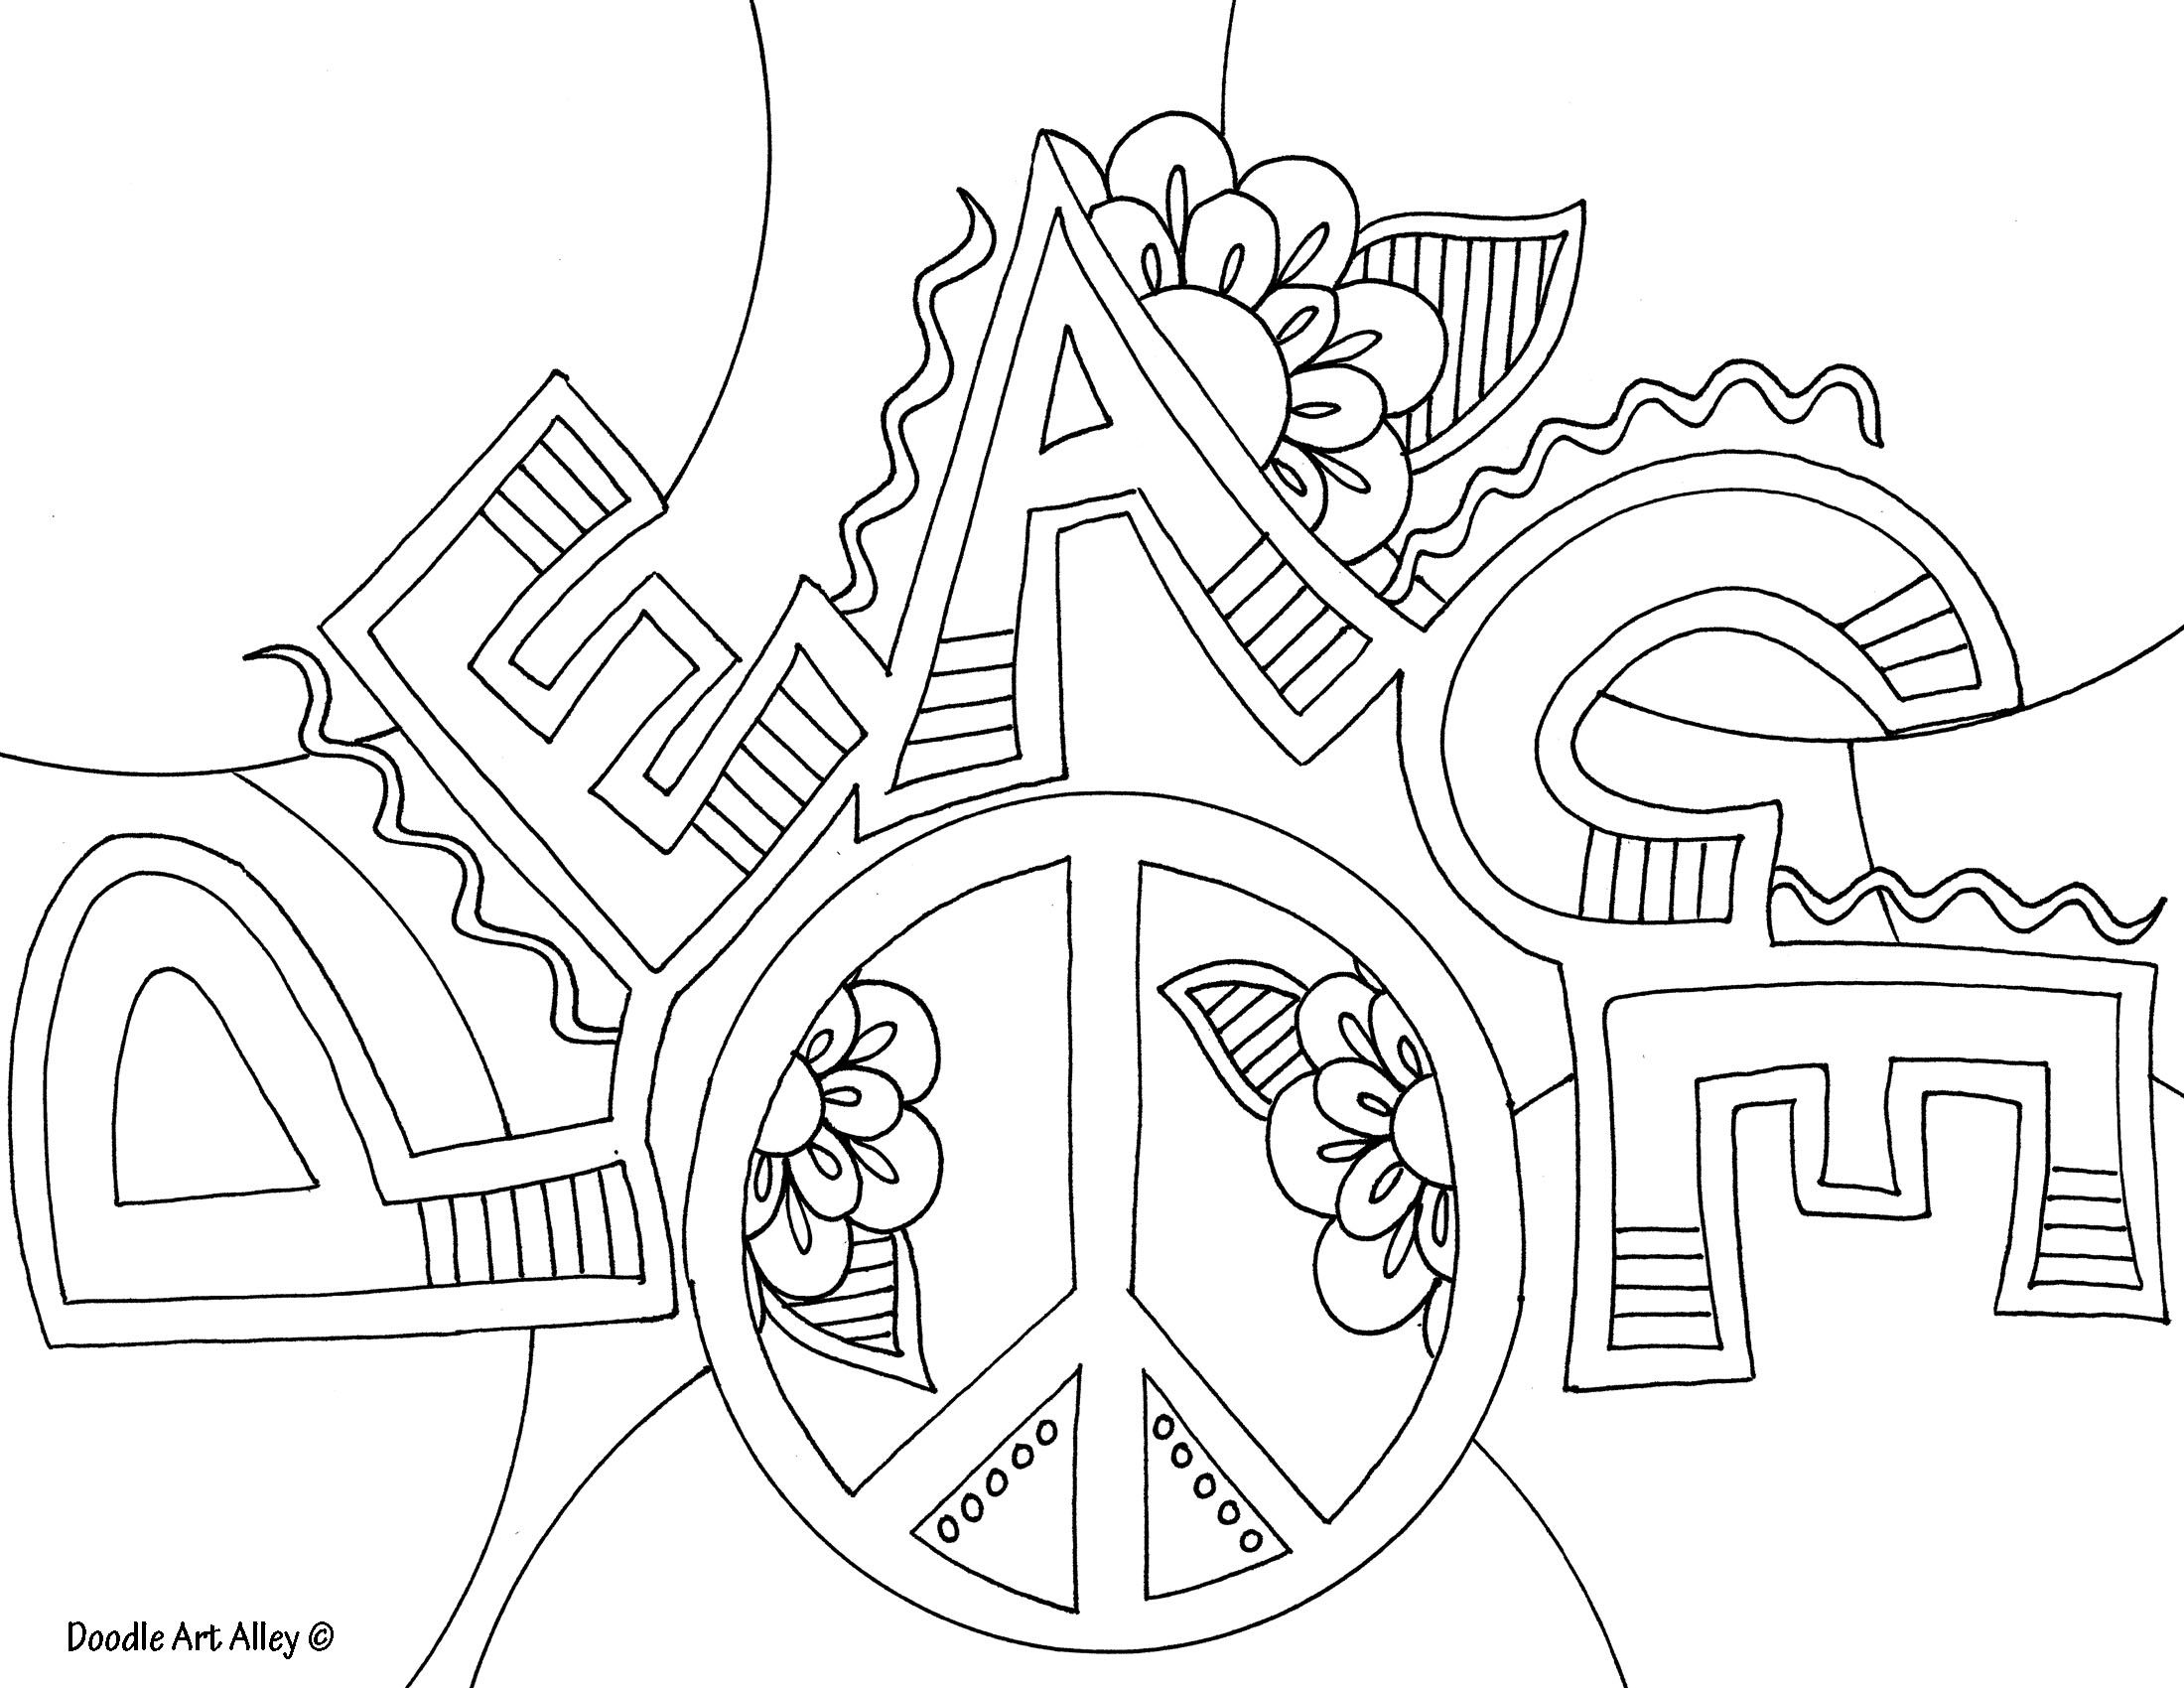 Doodle Art Alley Coloring Pages Page 1